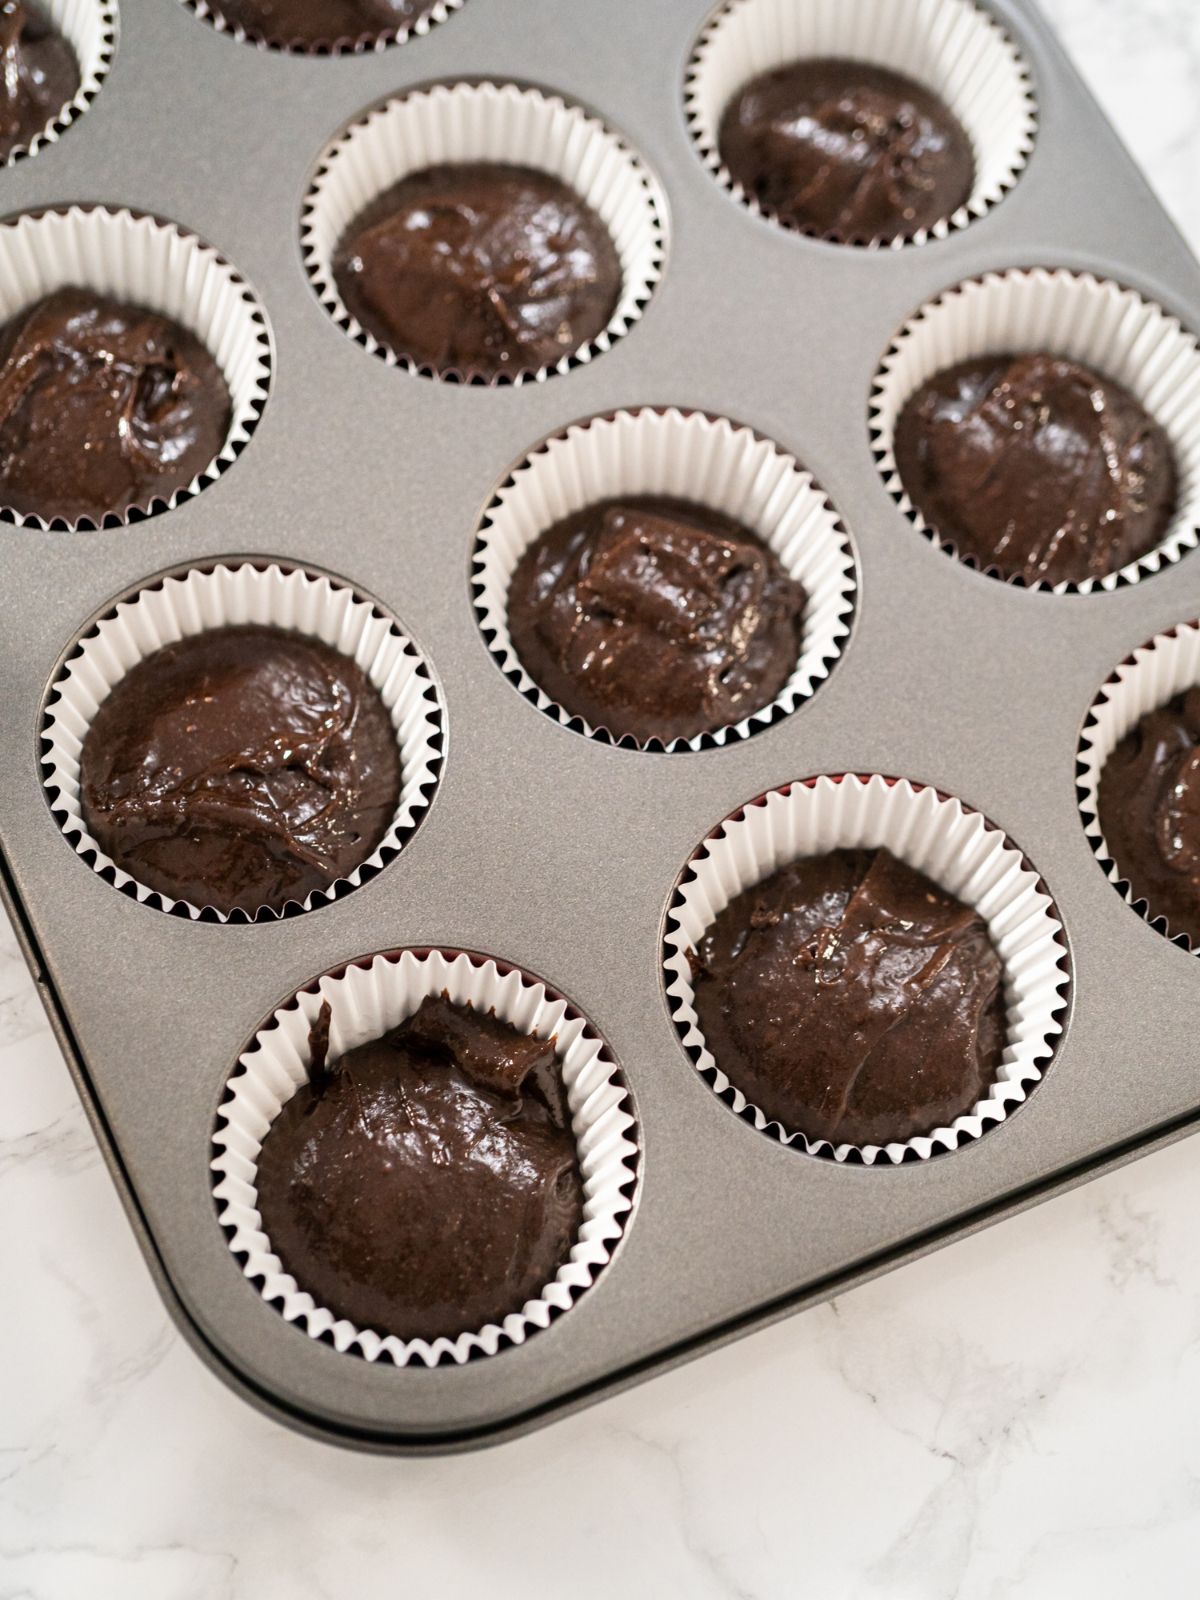 Muffin pan filled with unbaked chocolate muffin batter.